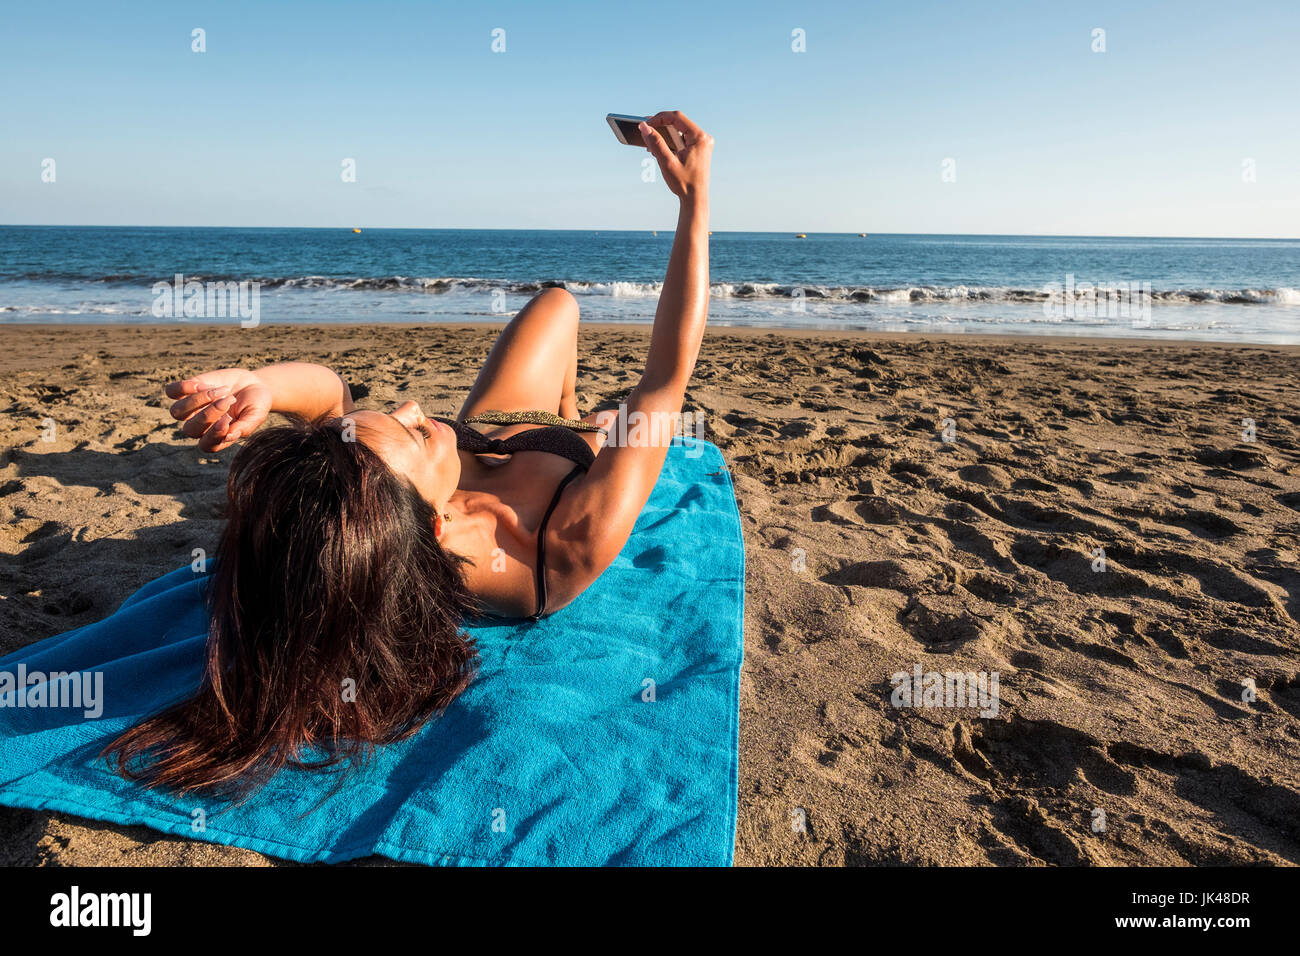 Caucasian woman laying on blanket on beach posing for cell phone selfie Stock Photo